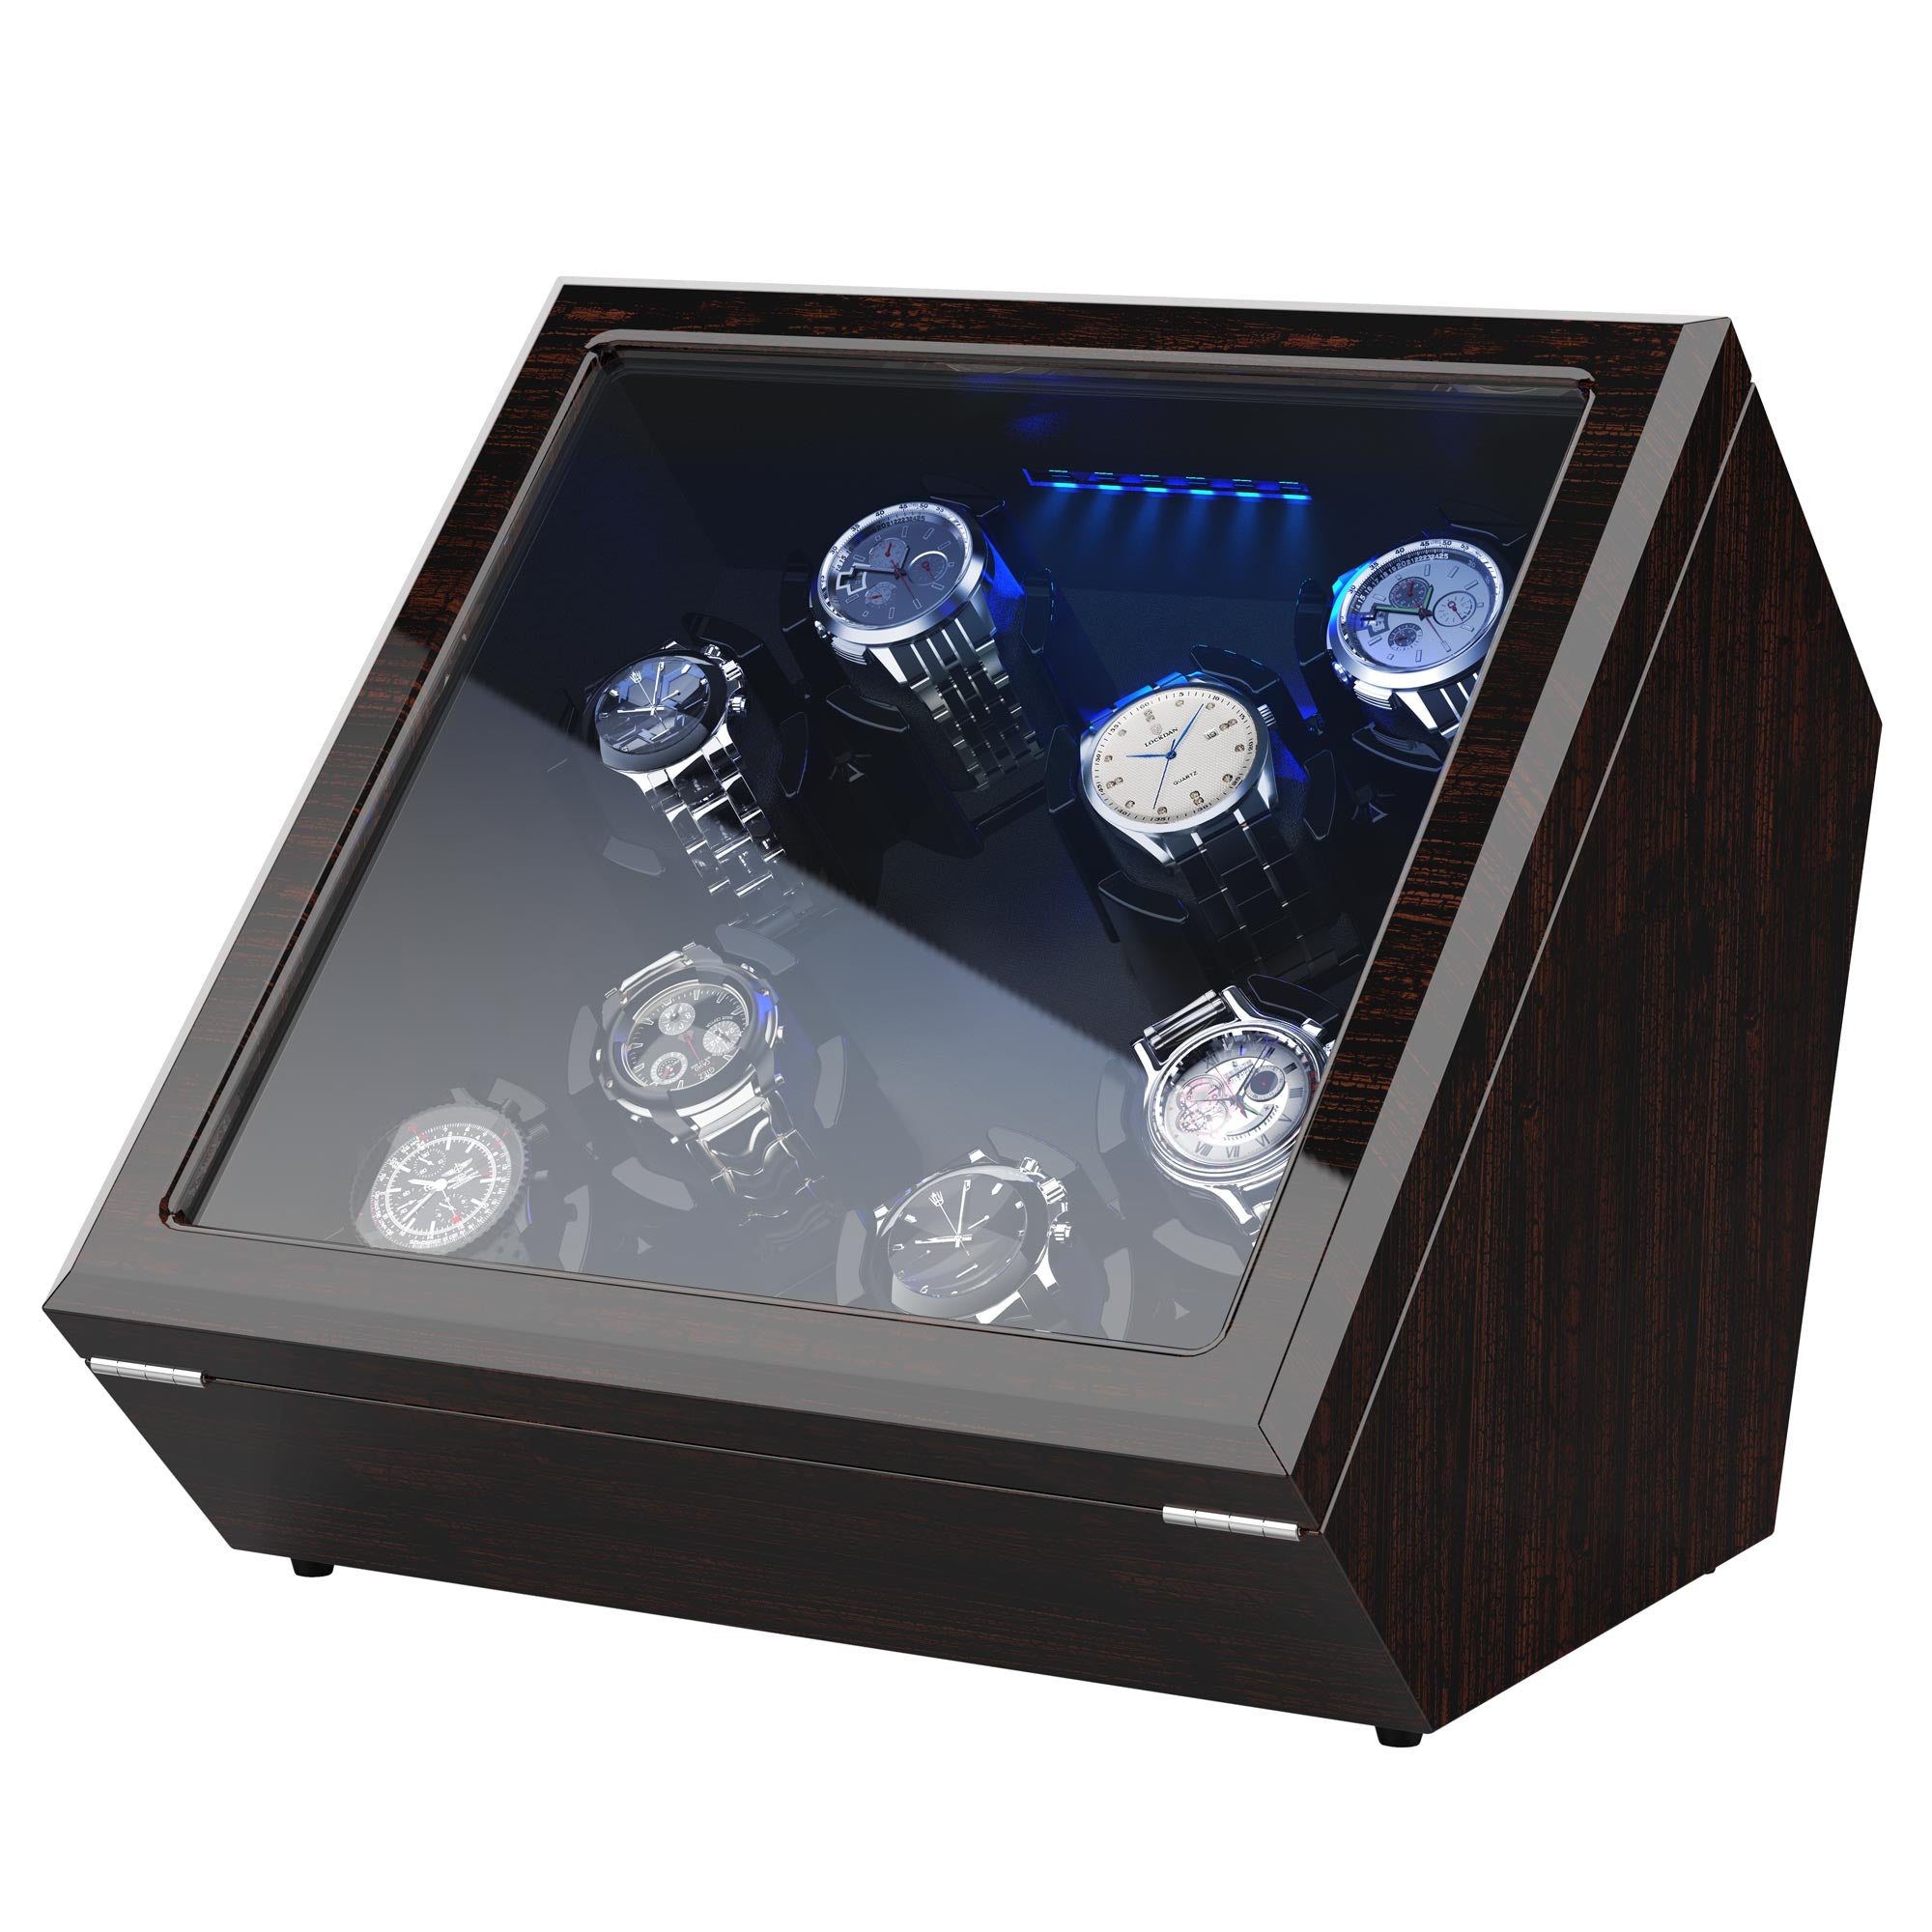 Automatic Watch Winder with high quality materials丨JINS&VICO, Watch ...